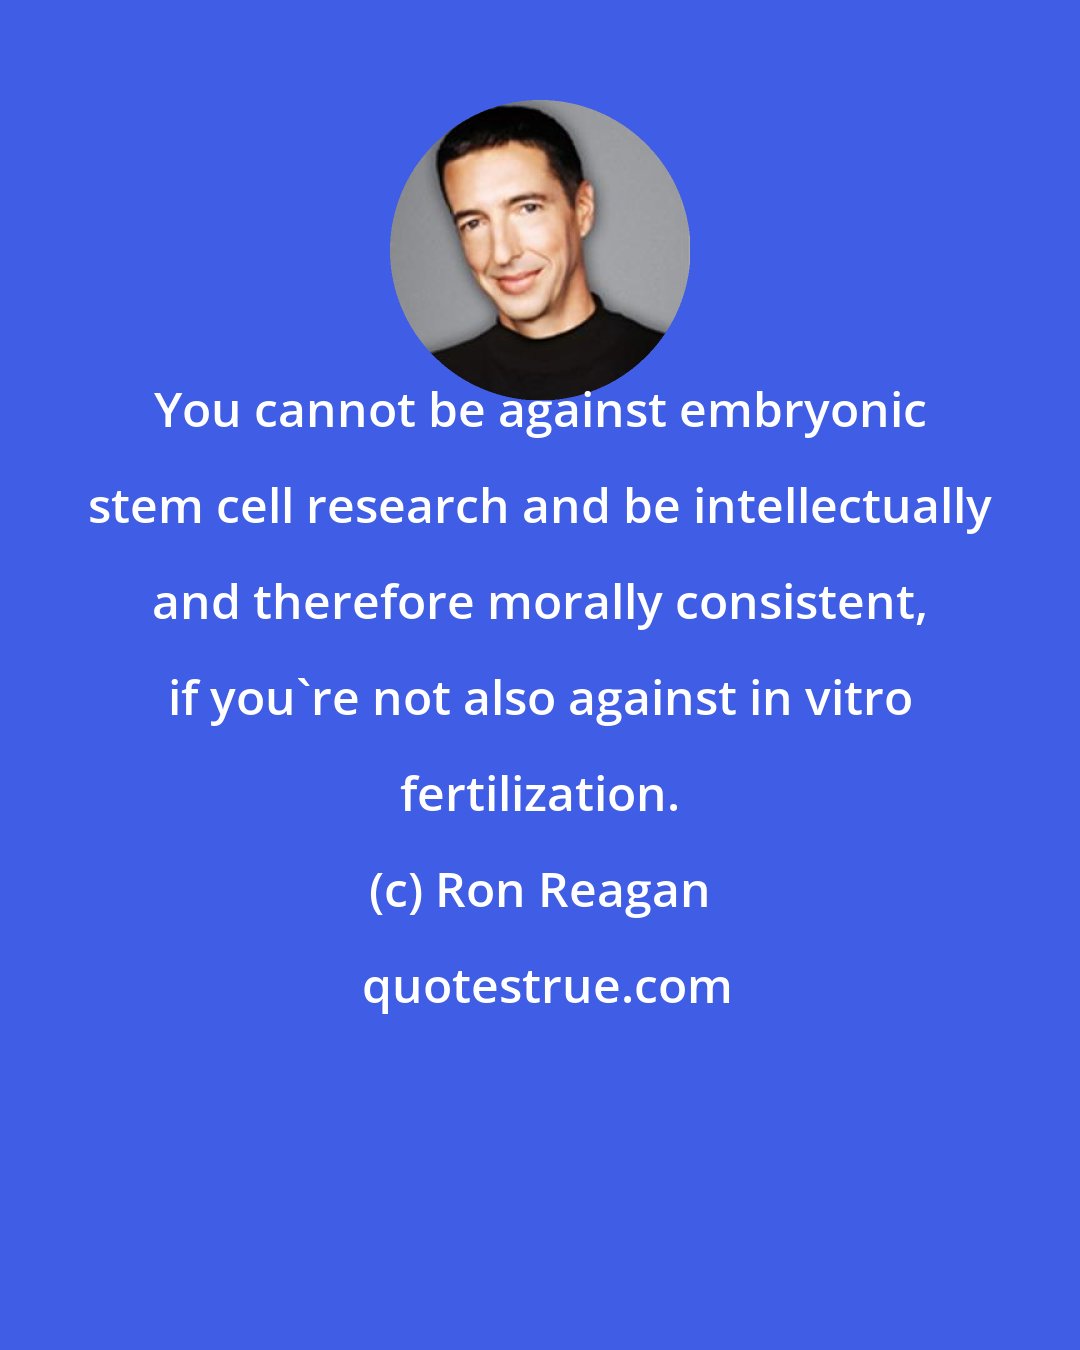 Ron Reagan: You cannot be against embryonic stem cell research and be intellectually and therefore morally consistent, if you're not also against in vitro fertilization.